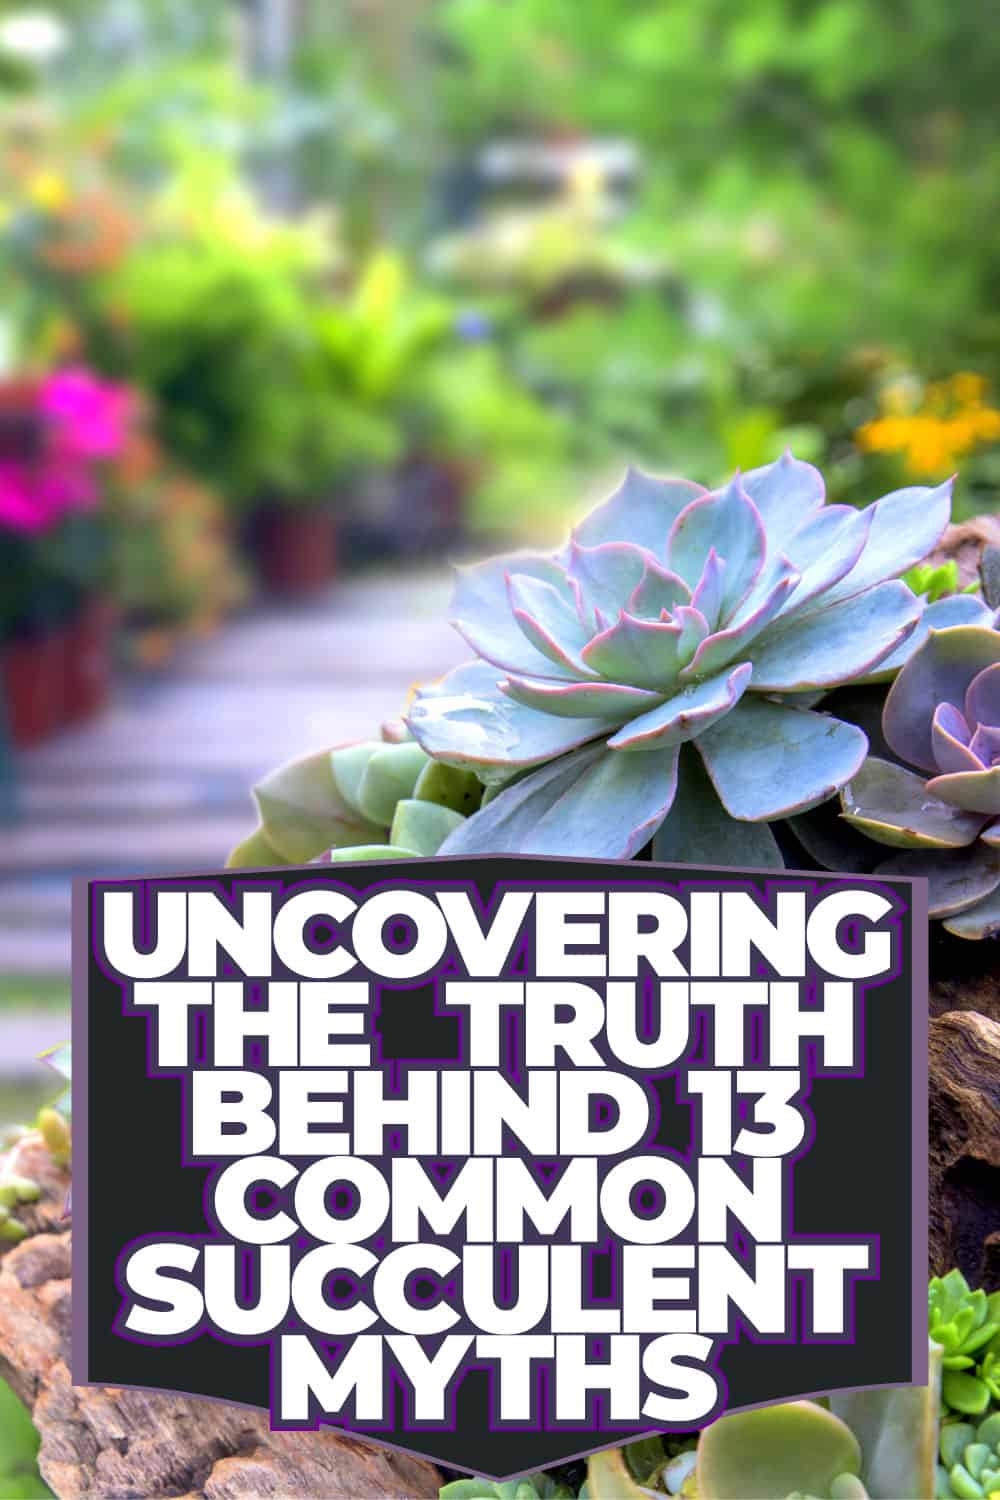 Uncovering the Truth Behind 13 Common Succulent Myths